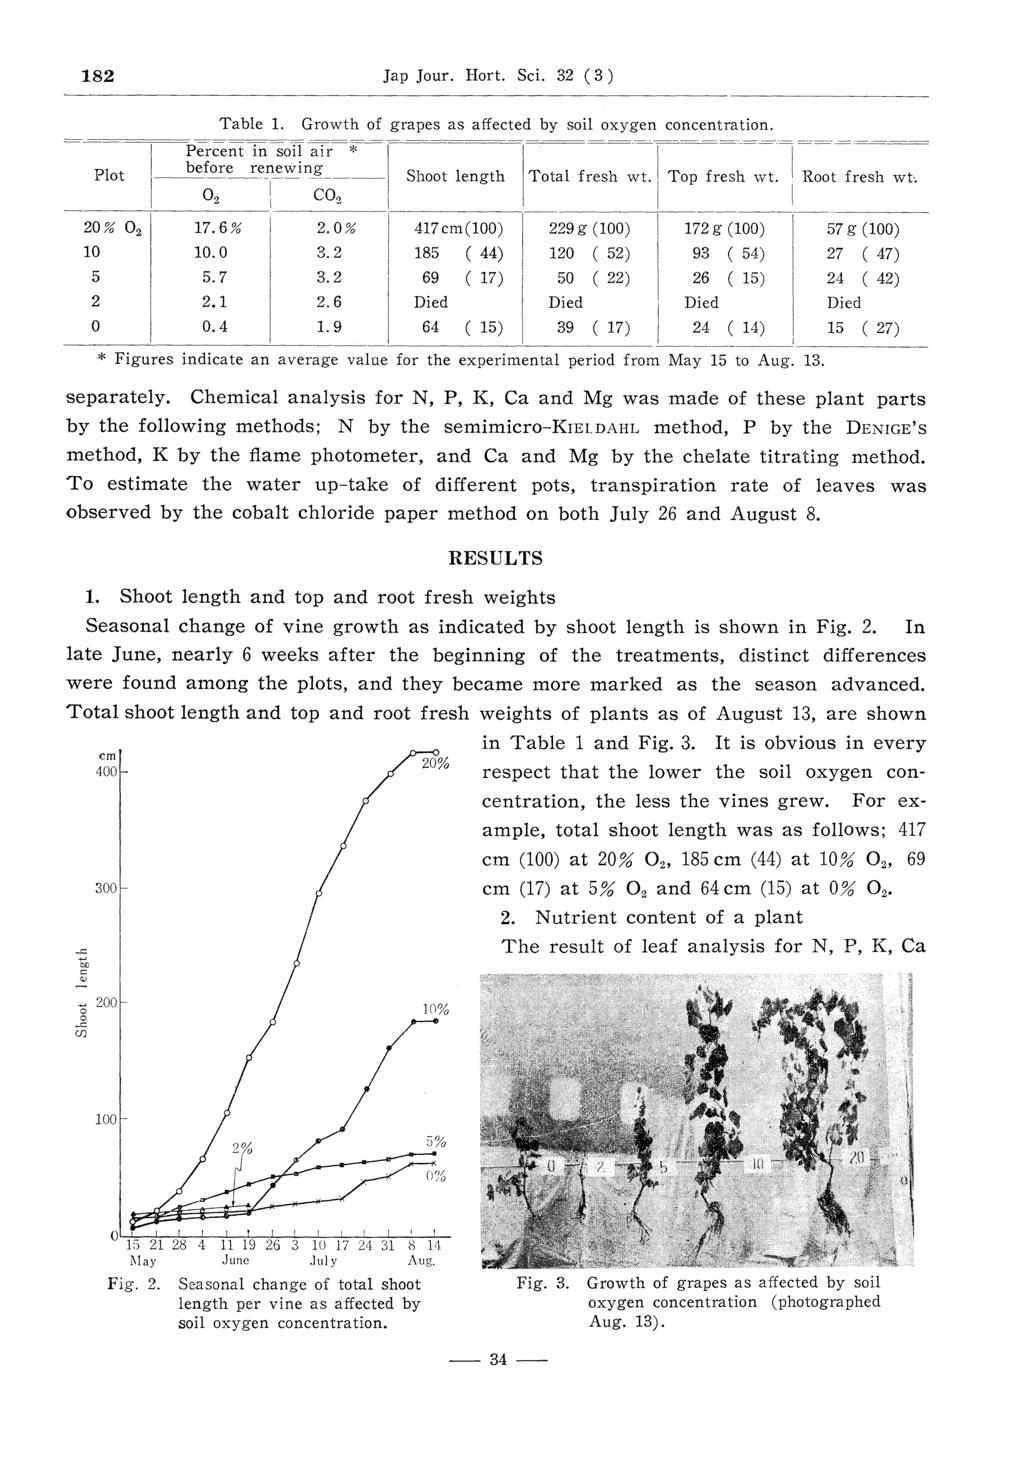 182 Jap Jour. Hort. Sci. 32 (3) Table 1. Growth of grapes as affected by soil oxygen concentration. separately.